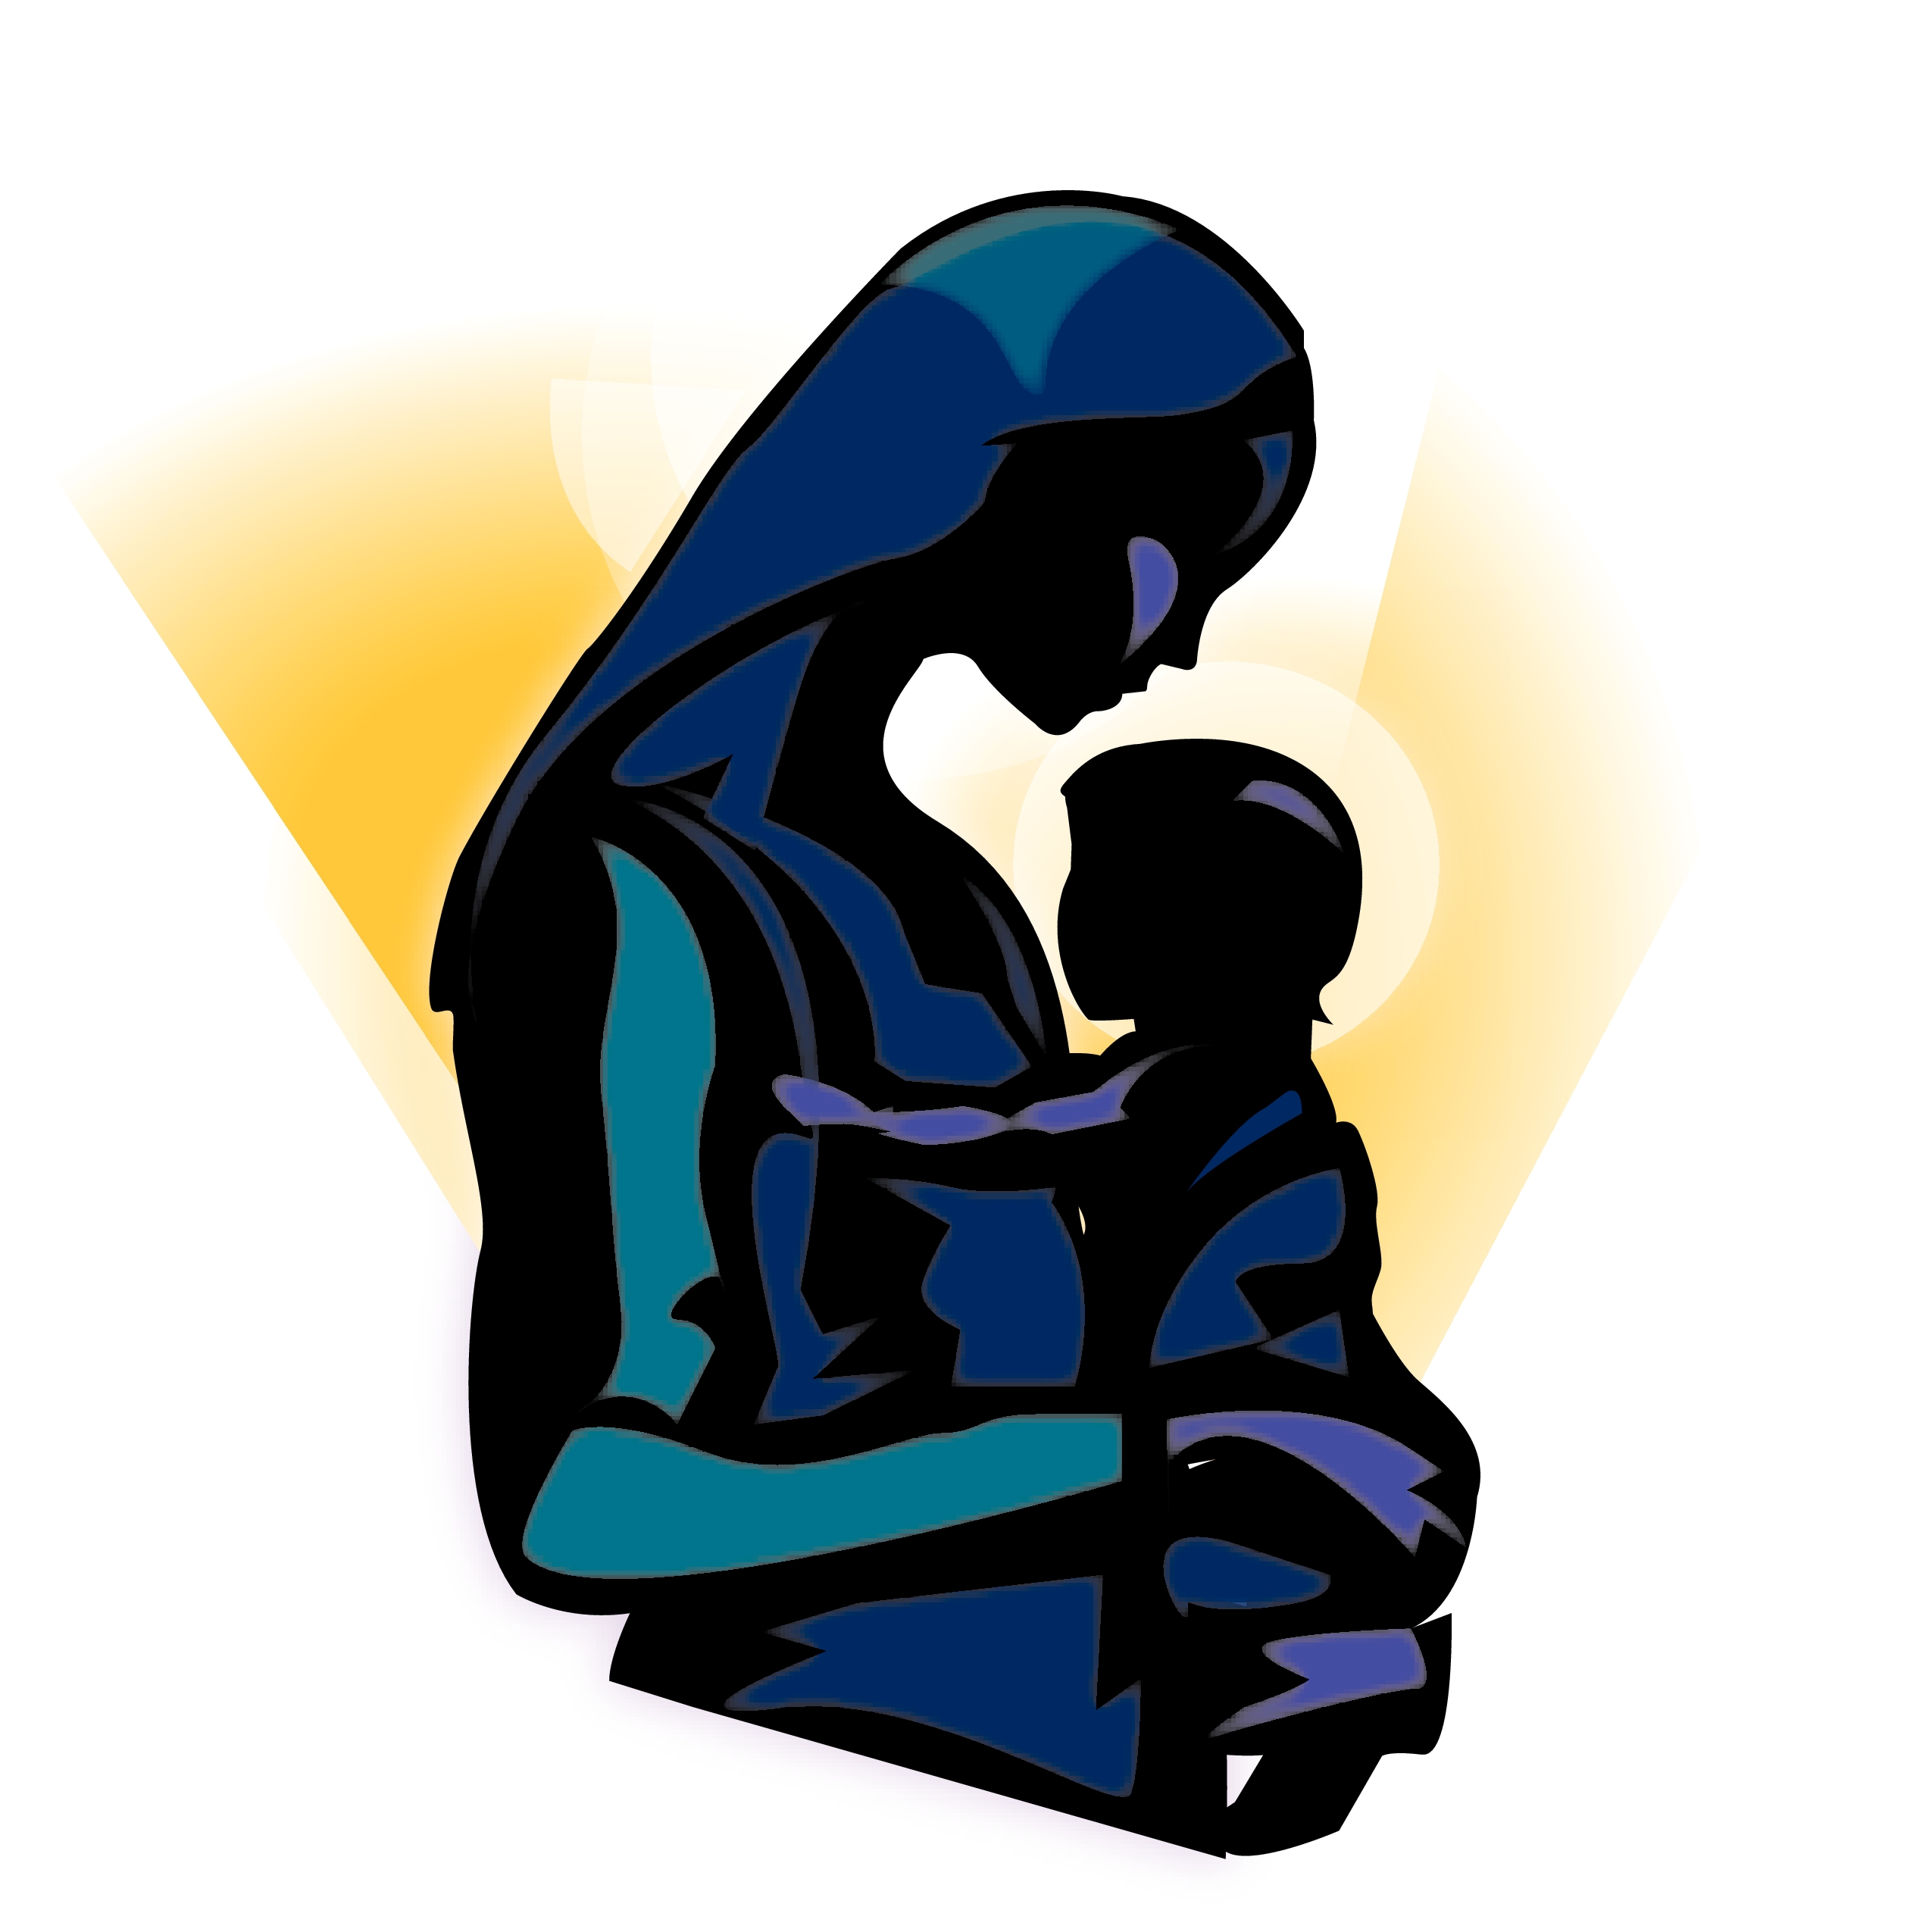 free clipart images of baby jesus - photo #15